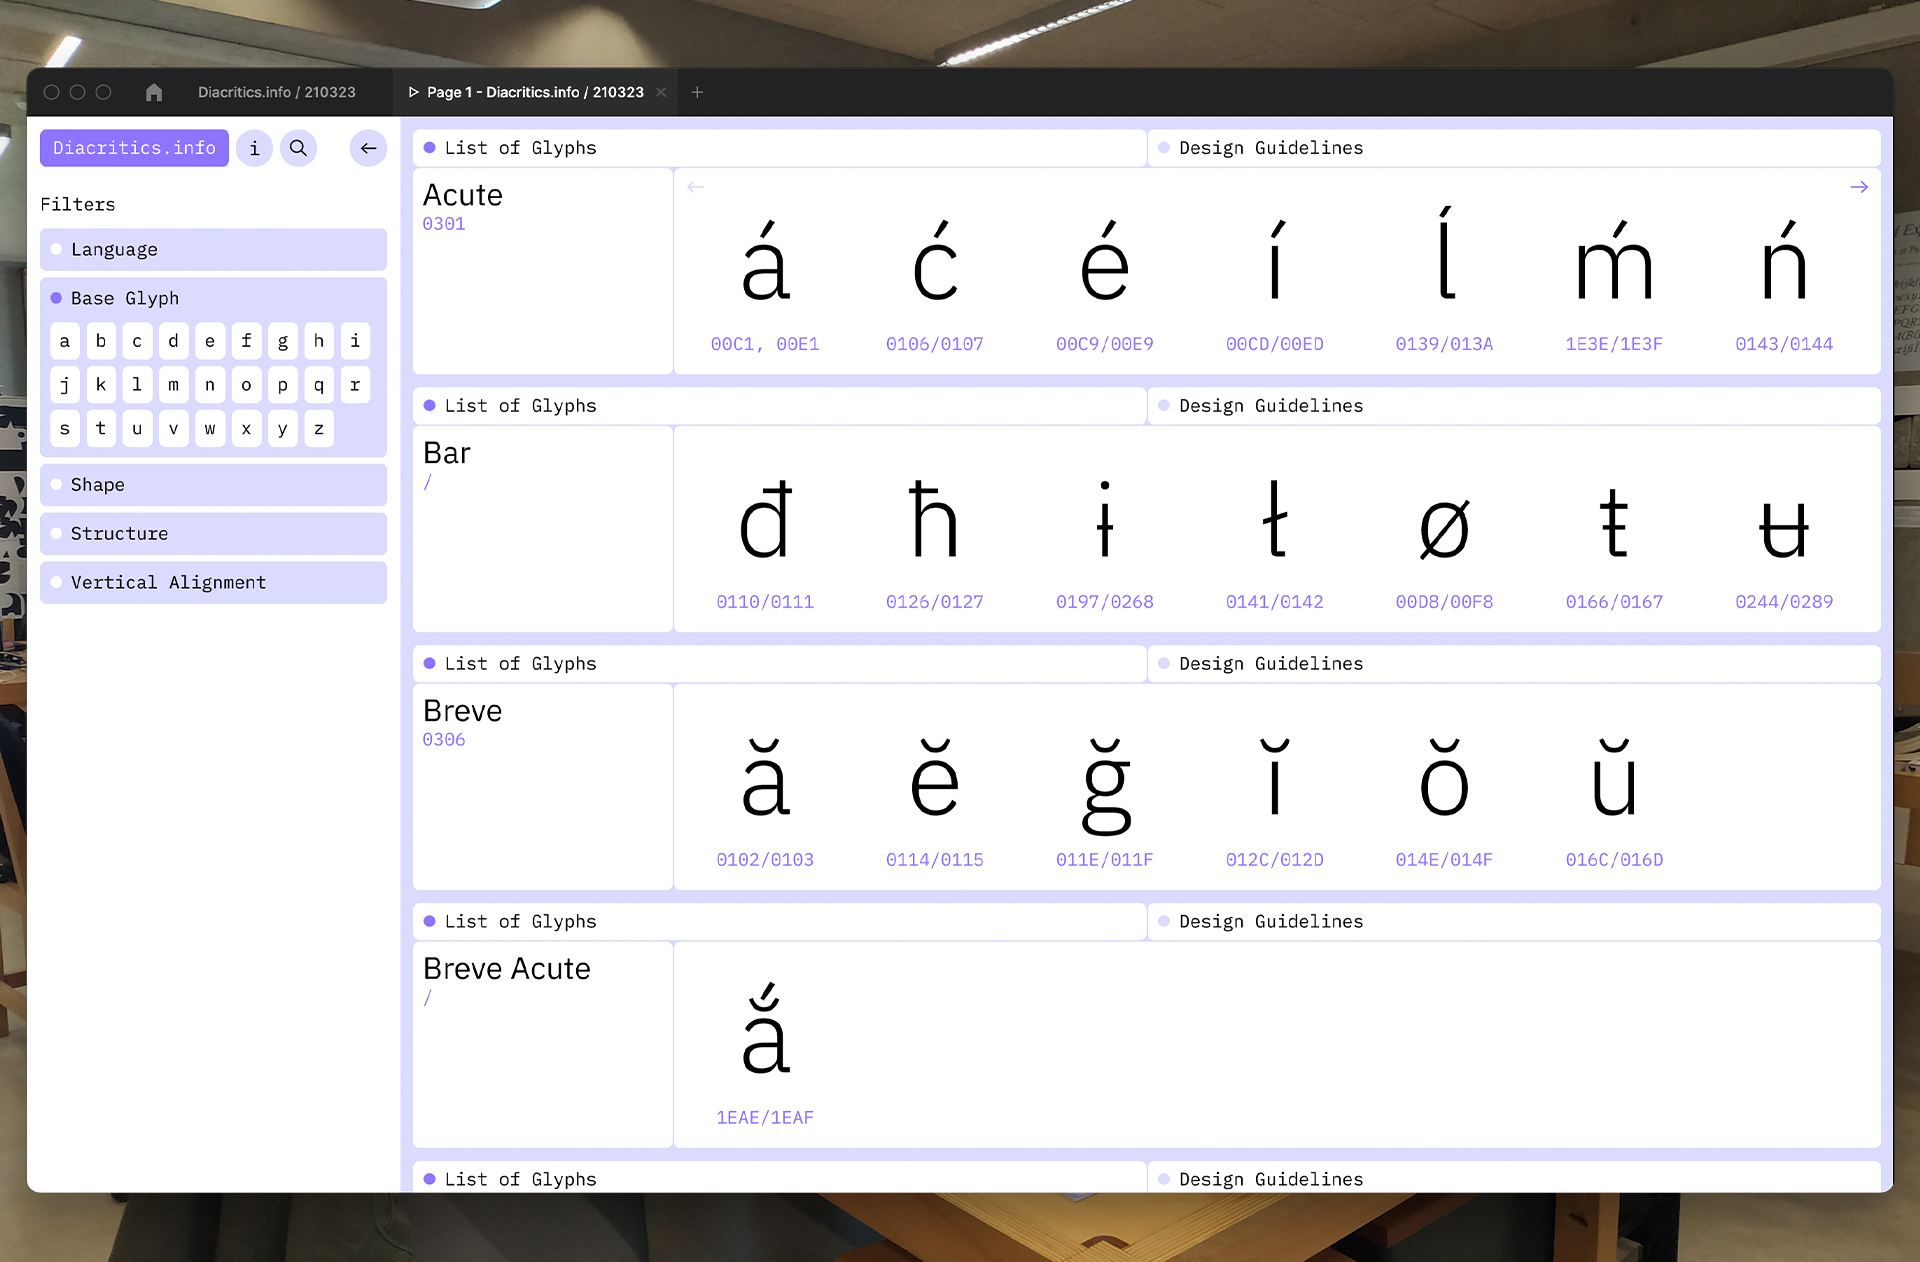 Research Project screenshot showing the home page of diacritics.info website